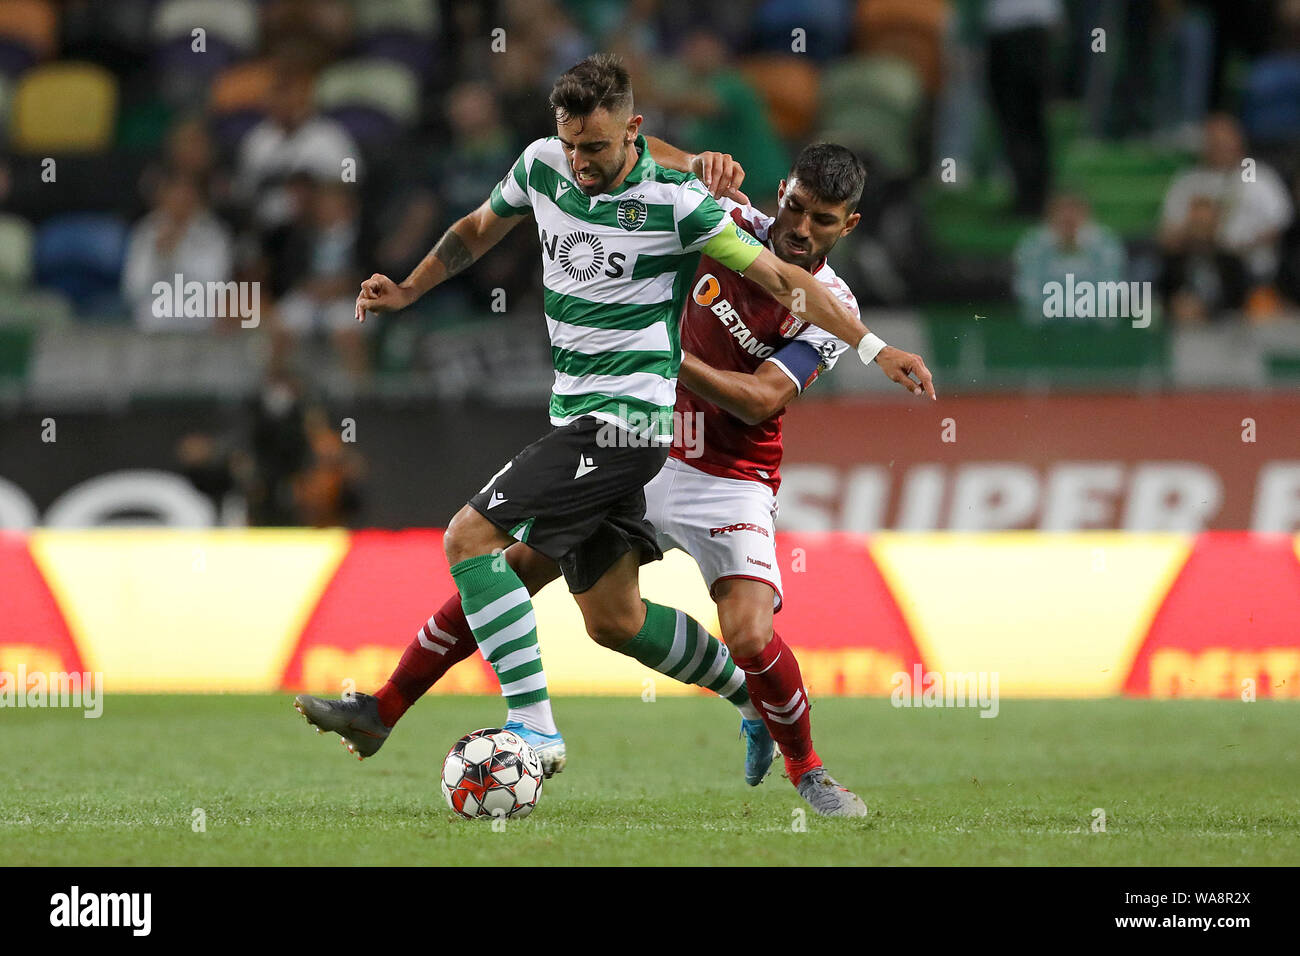 Bruno Fernandes of Sporting CP (L) and Ricardo Esgaio of SC Braga (R) are  seen in action during the League NOS 2019/20 football match between Sporting  CP and SC Braga in Lisbon.(Final